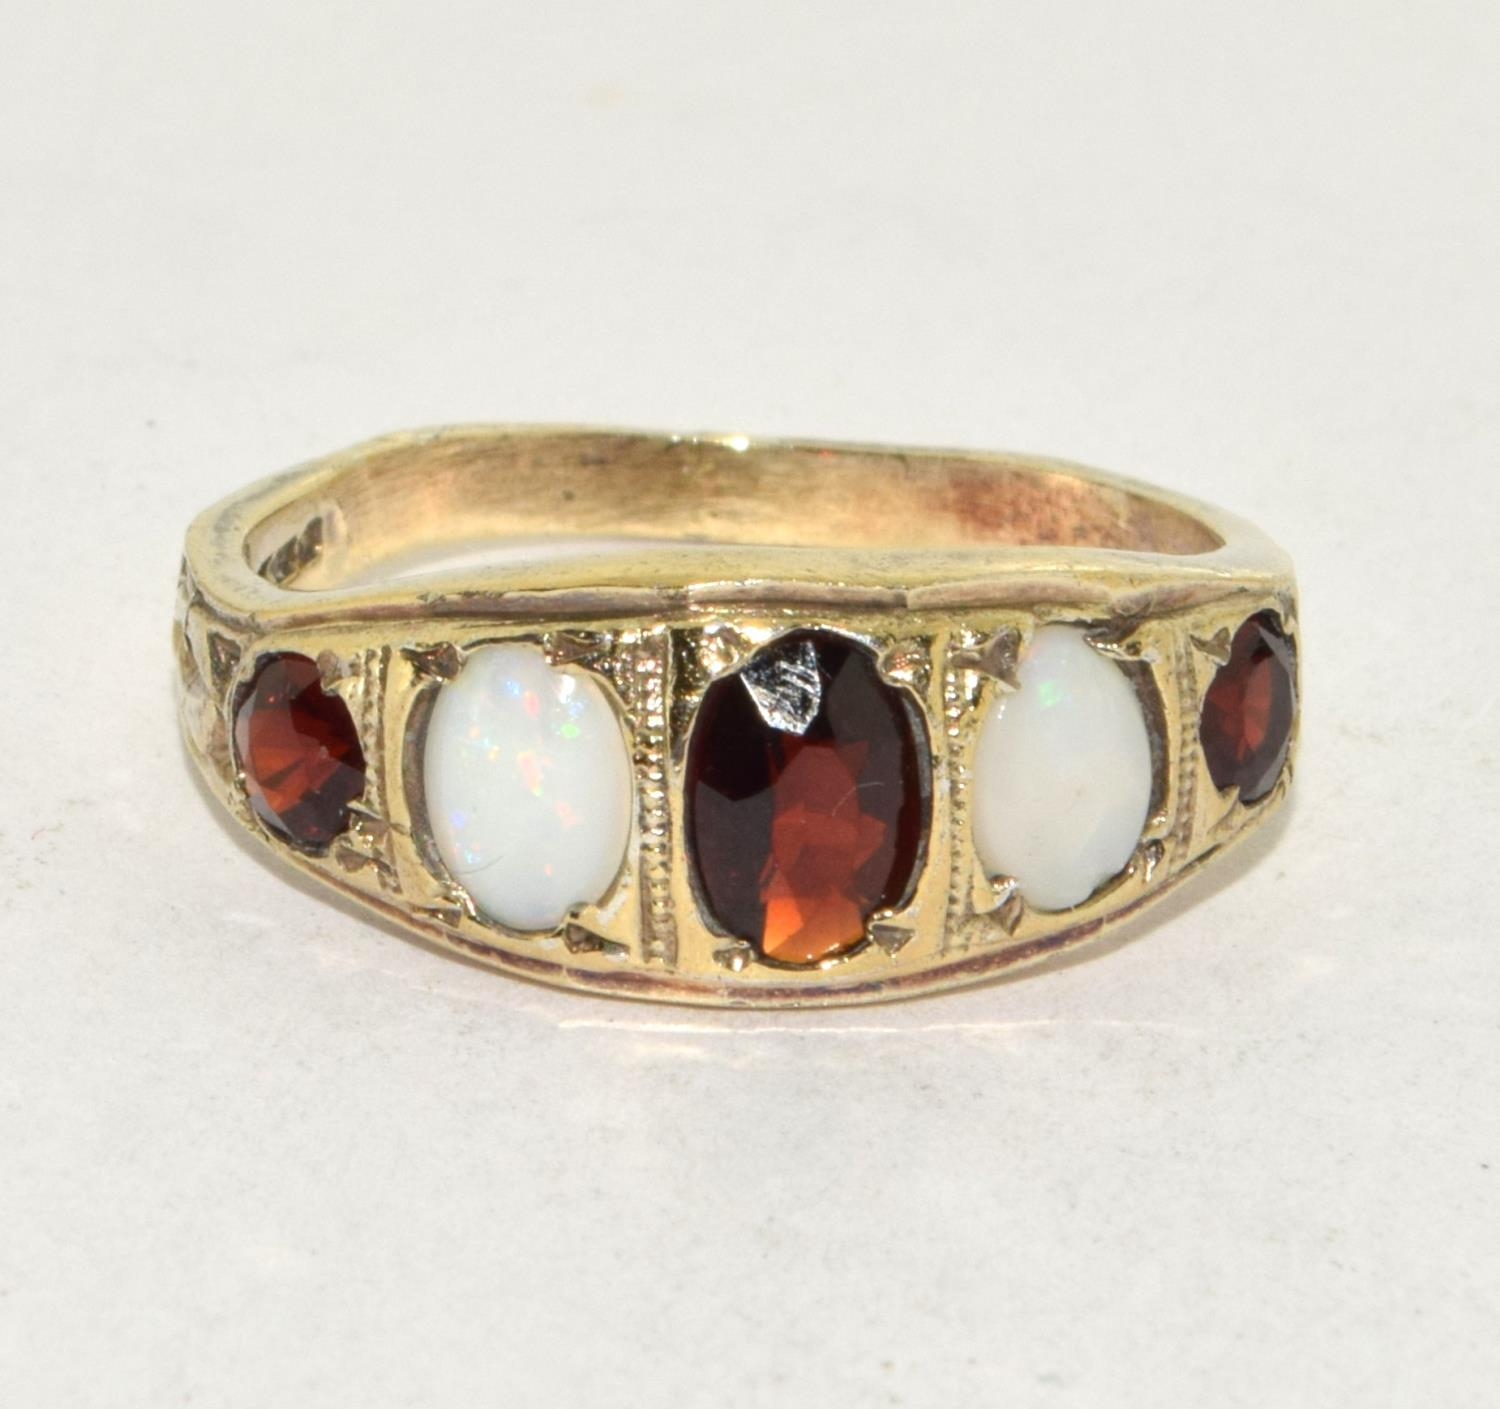 Vintage 9ct gold Opal and Garnet 5 stone ring size O